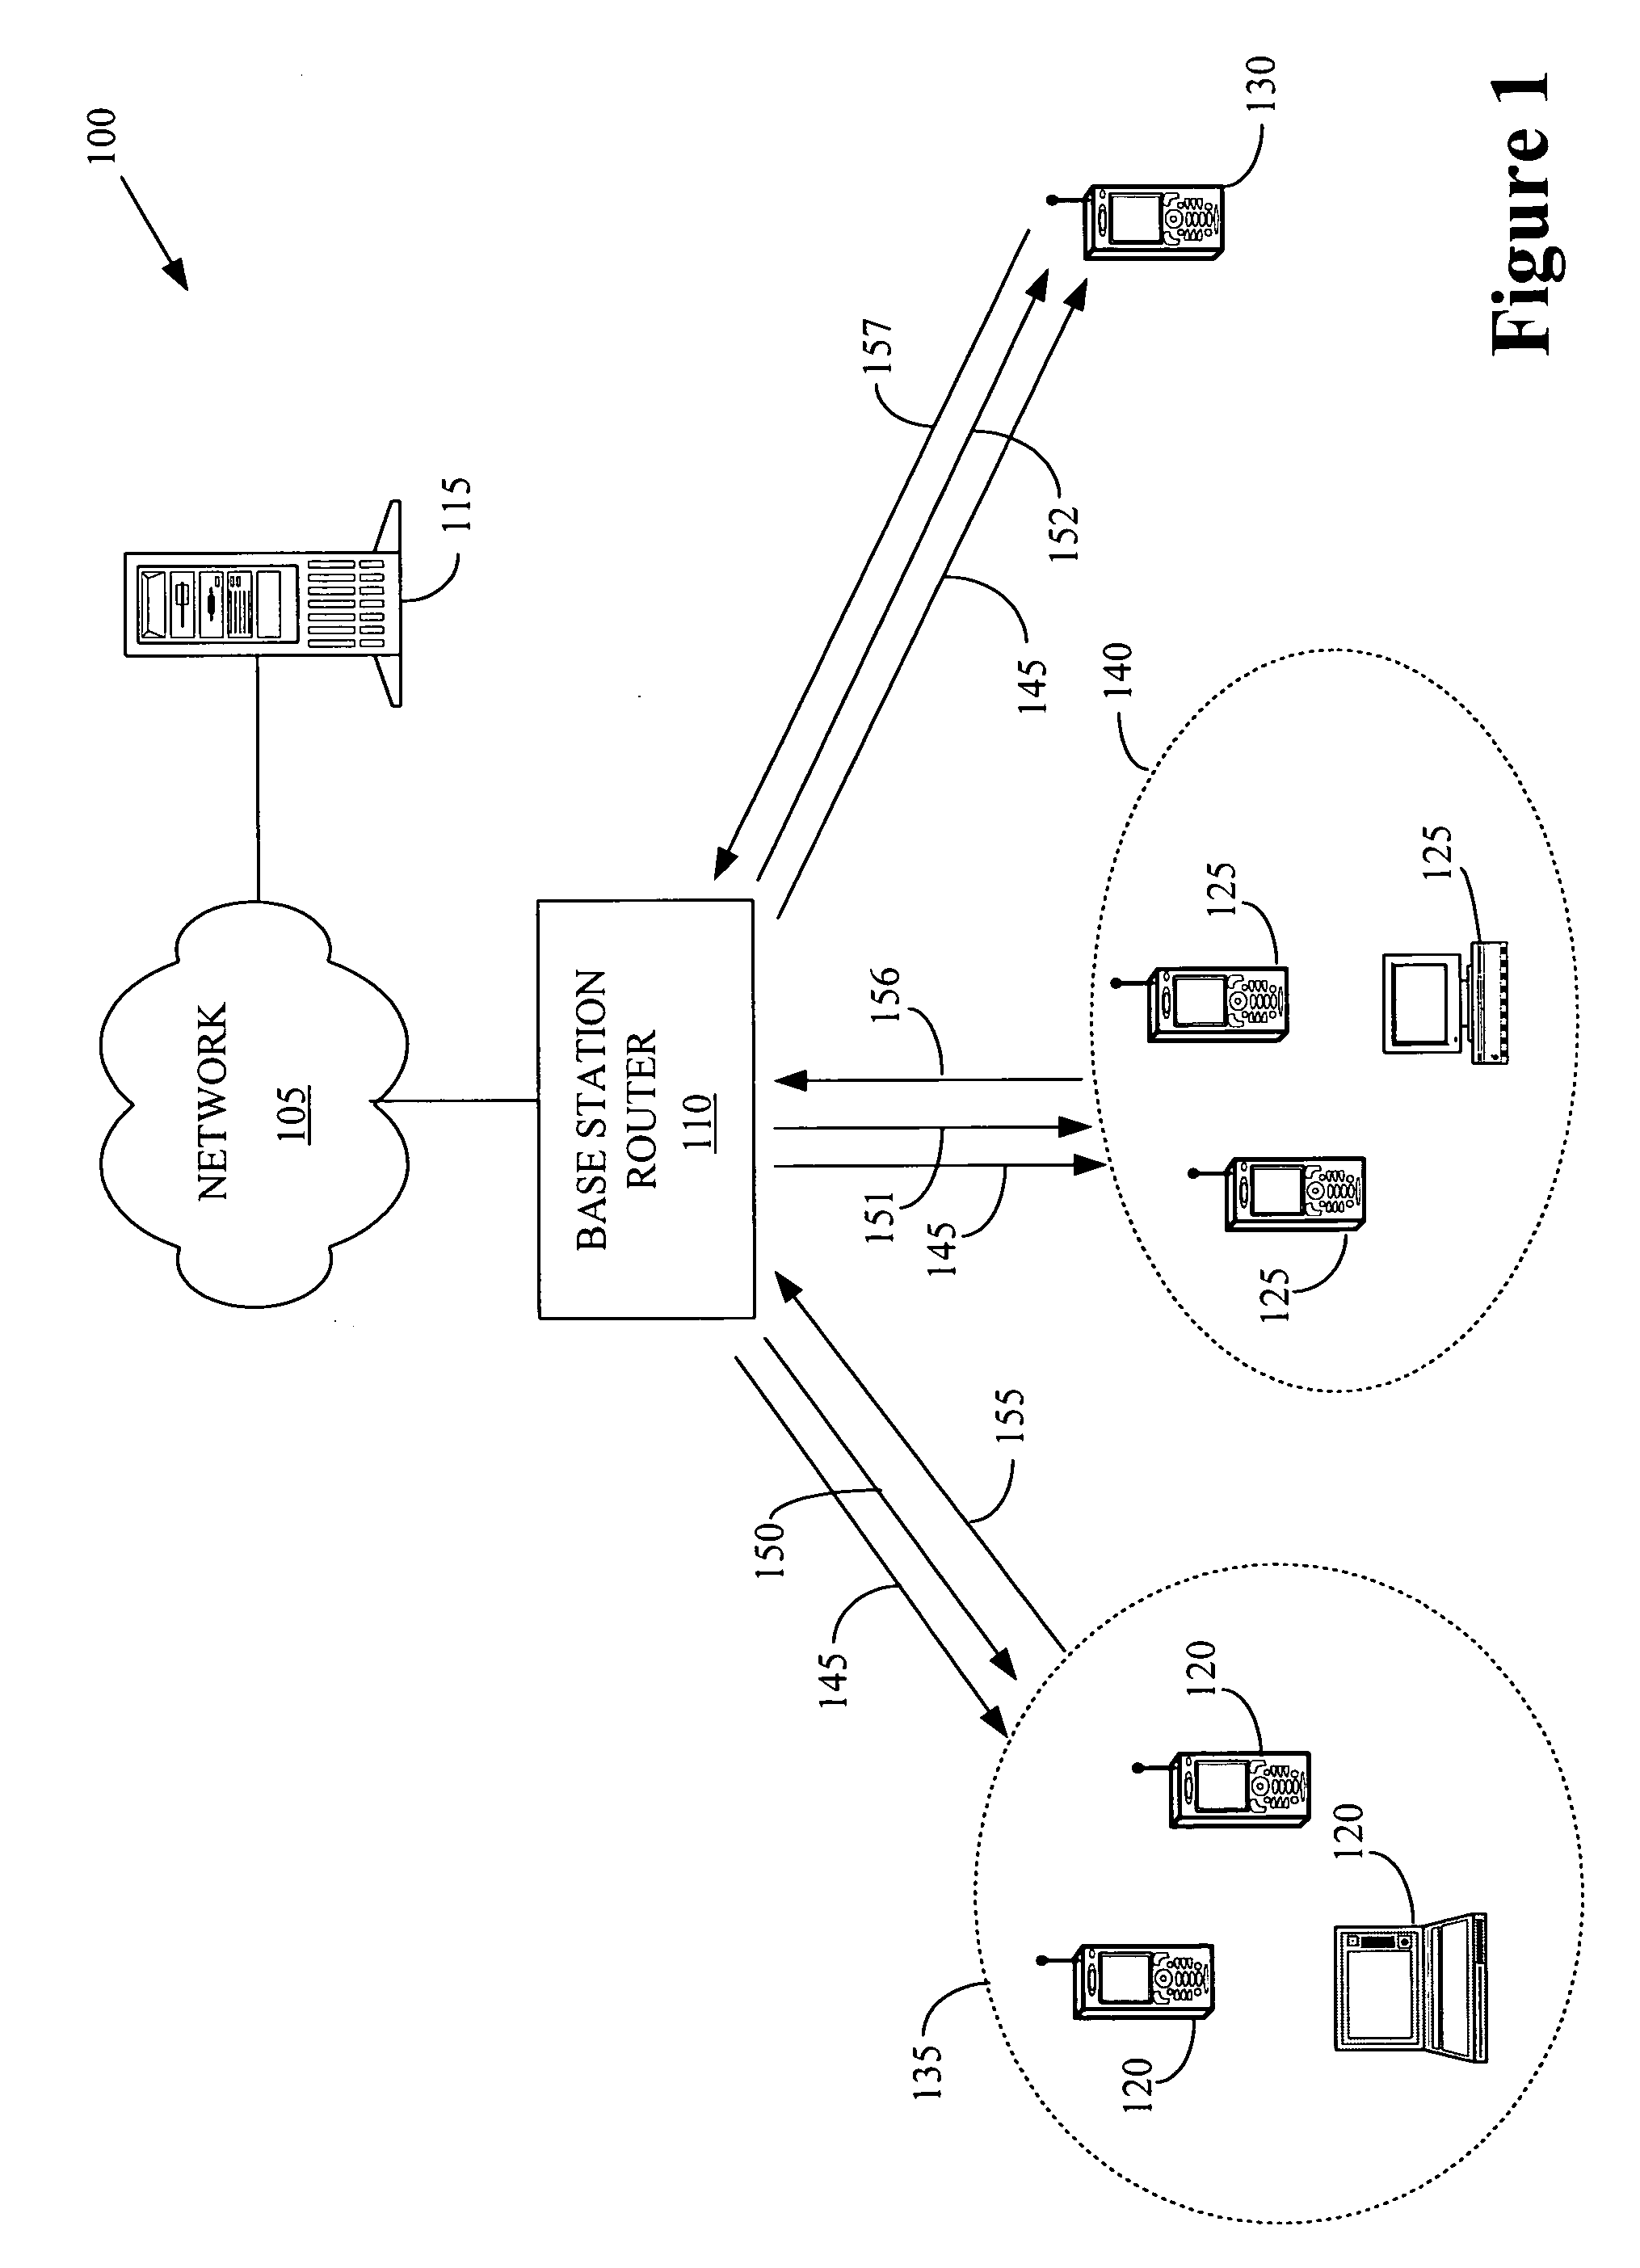 Method for associating multiple users with a shared downlink channel